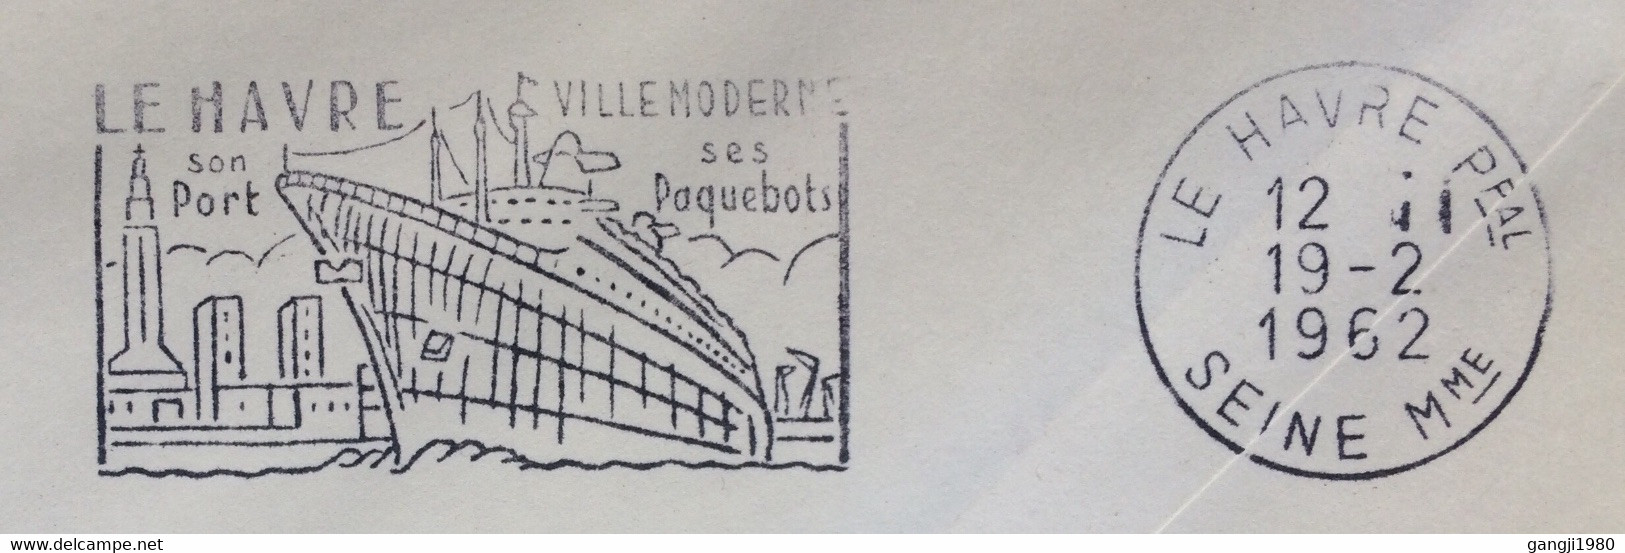 USA -FRANCE -1962, USED COVER, PICTURE CACHET,  ”FRANCE” WORLD LARGEST SHIP,MAIDEN VOYAGE, LE HAVRE PAQUEBOTS ! MAIDEN V - Briefe U. Dokumente